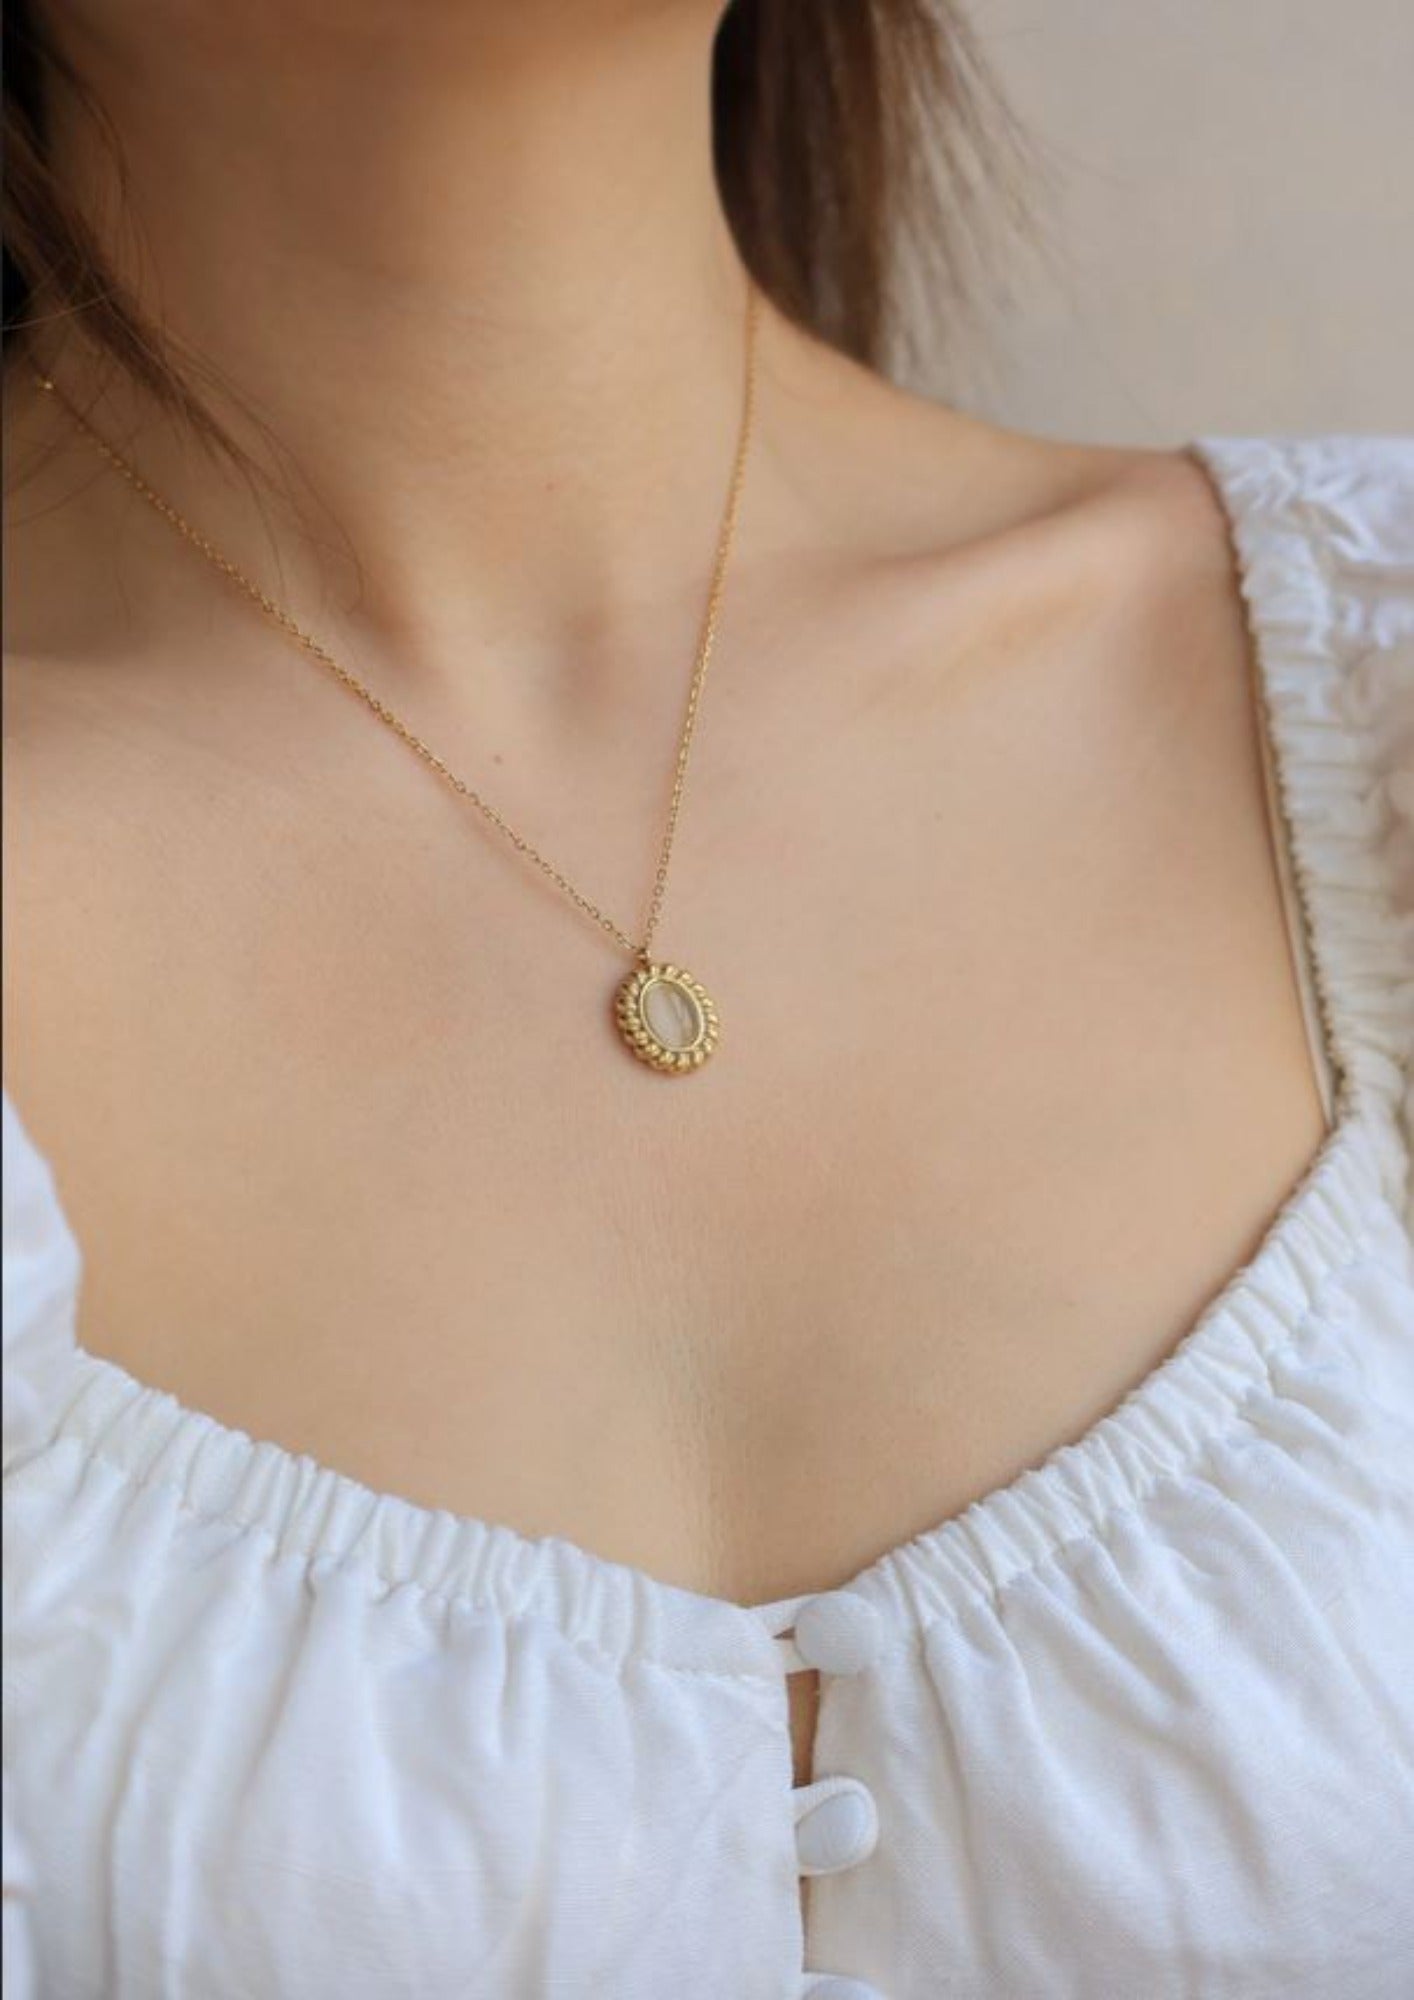 SUN OPAL NECKLACE neck Yubama Jewelry Online Store - The Elegant Designs of Gold and Silver ! 